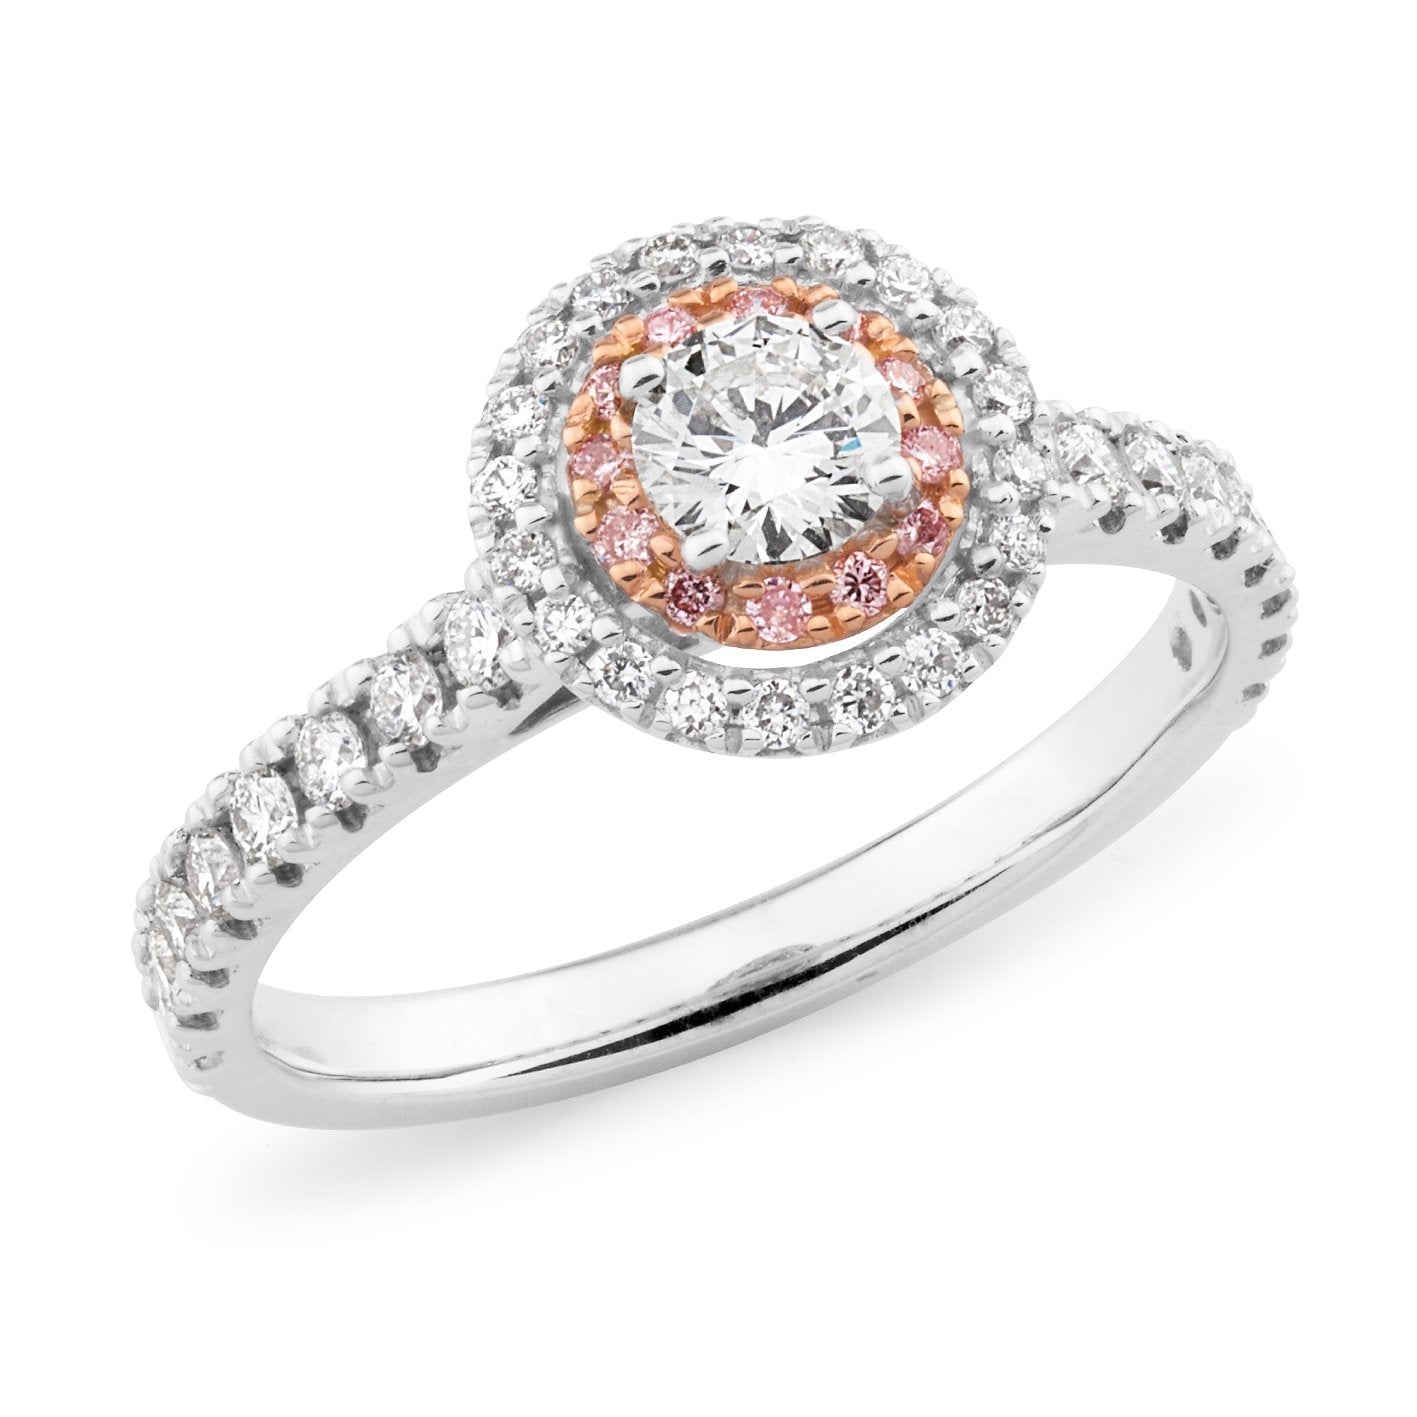 PINK CAVIAR 0.73ct White Round Brilliant & Pink Diamond Halo Engagement Ring in 18ct White Gold